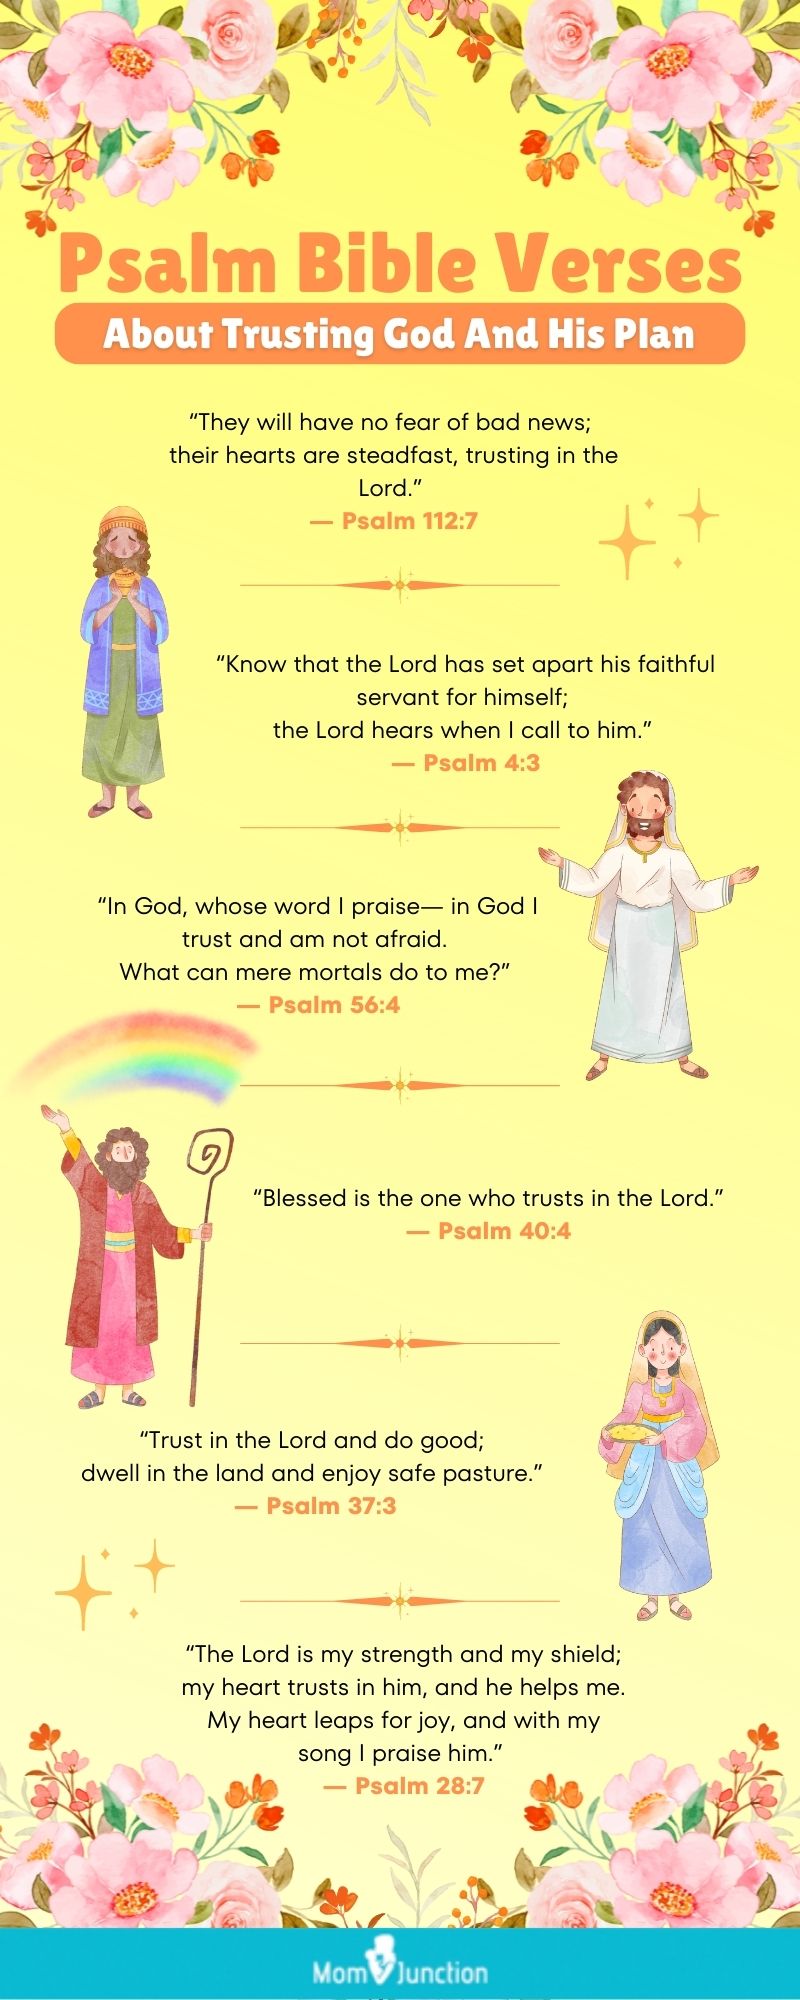 Psalm Bible Verses About Trusting God And His plan [infographic]